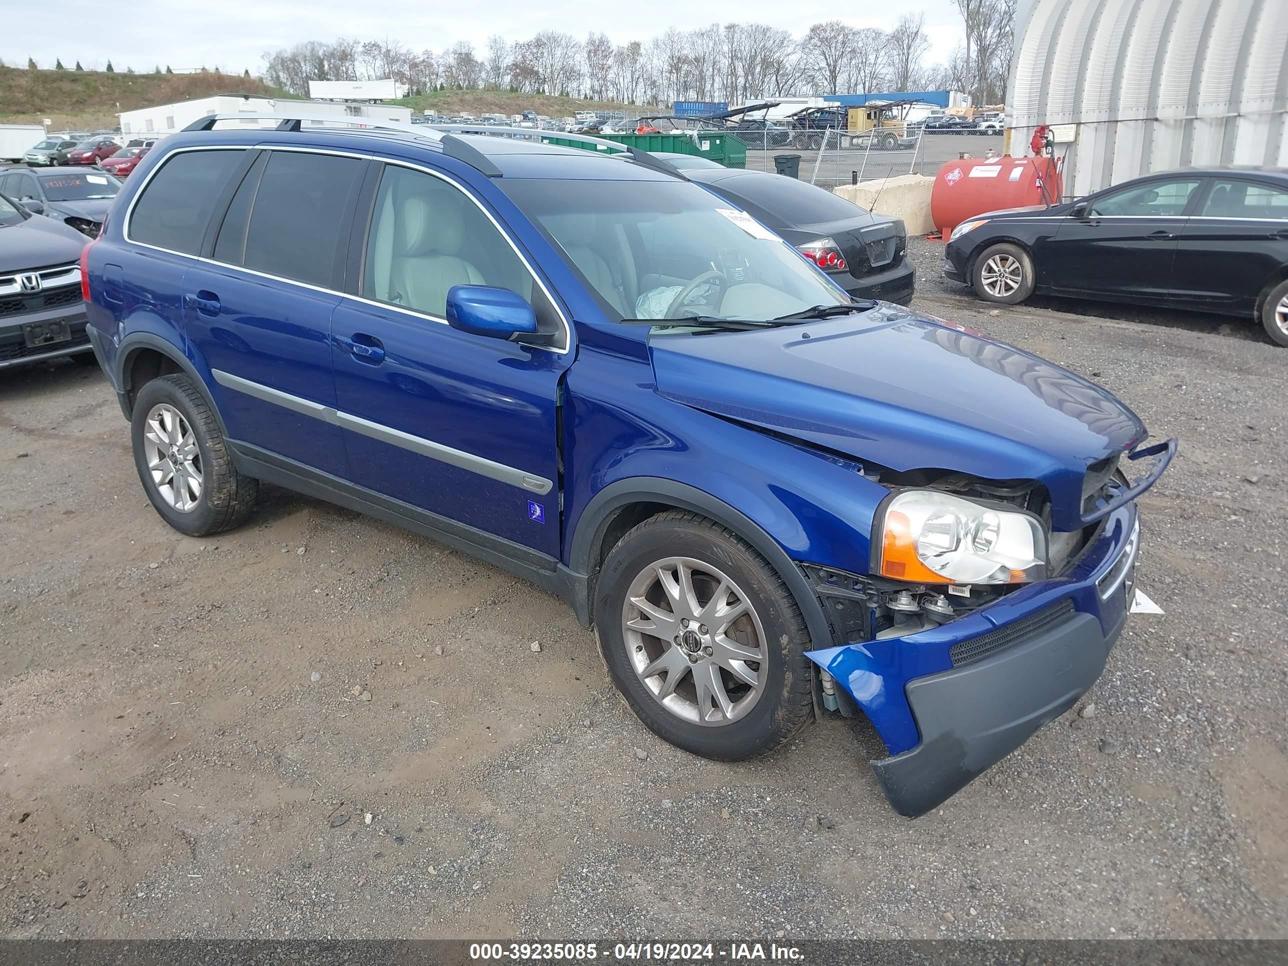 vin: YV4CZ852361283909 YV4CZ852361283909 2006 volvo xc90 4400 for Sale in 07865, 985 State Route 57, Port Murray, New Jersey, USA